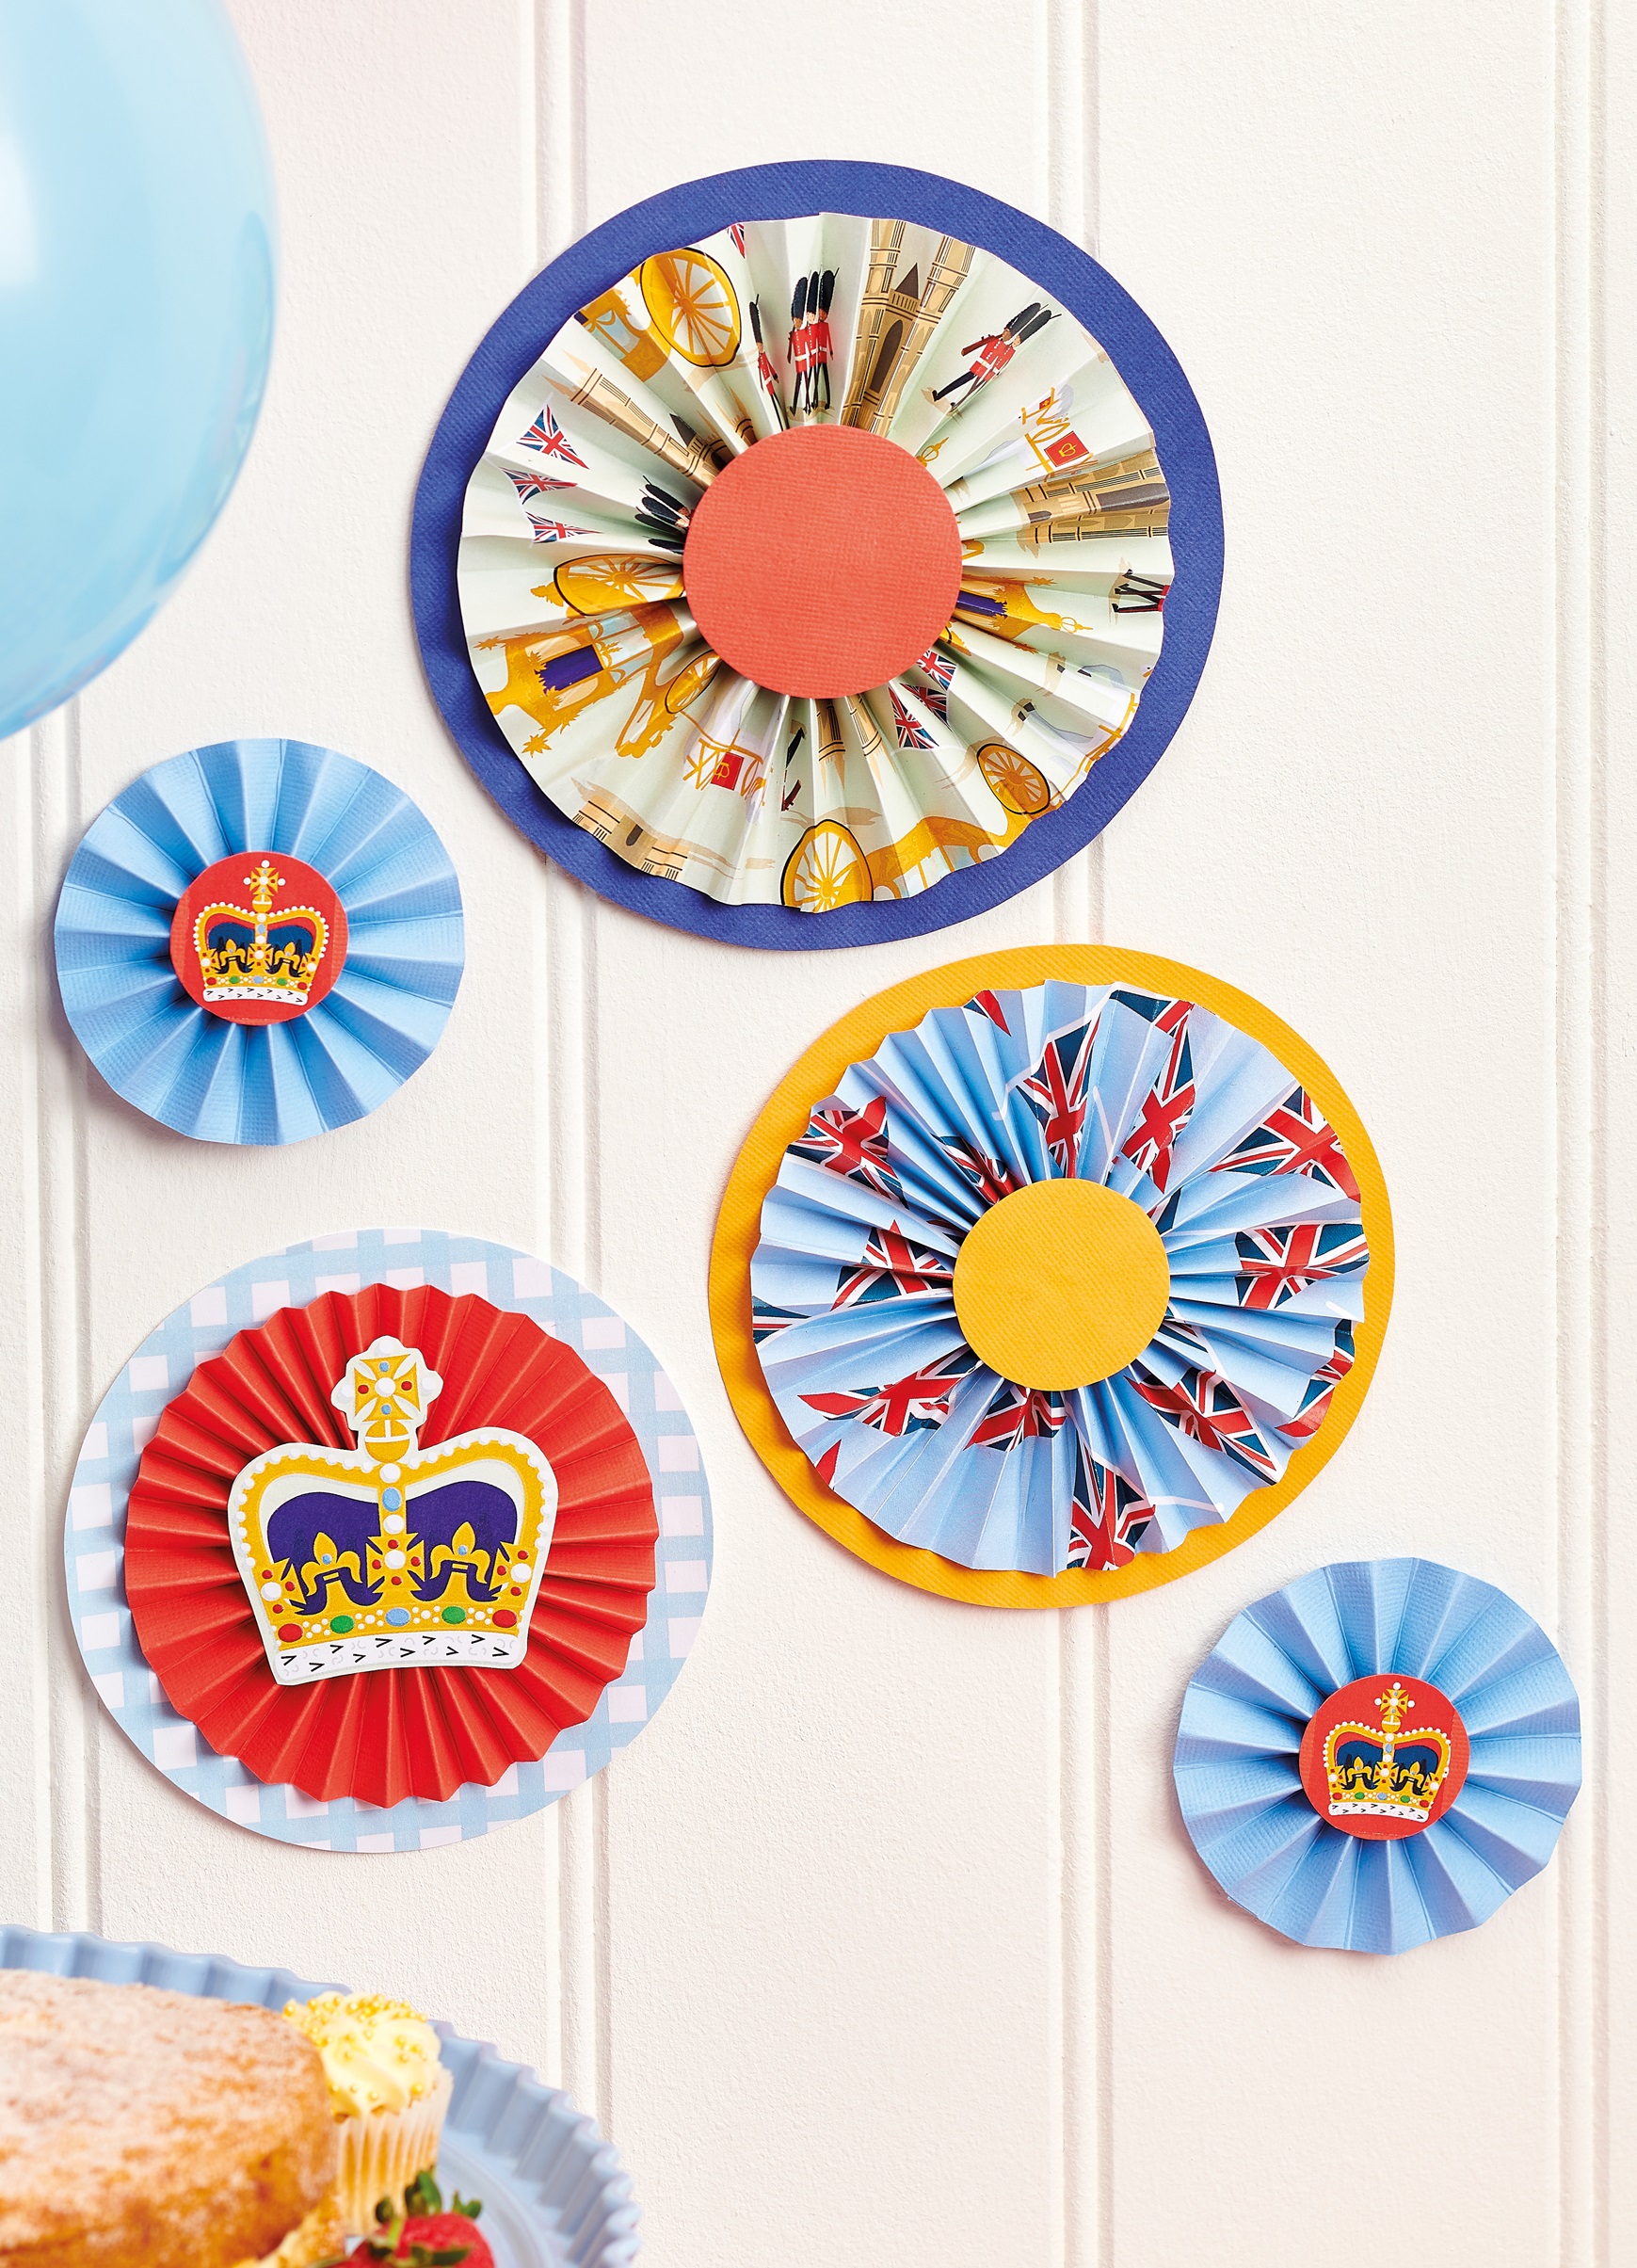 Coronation craft ideas: How to make paper fan decorations